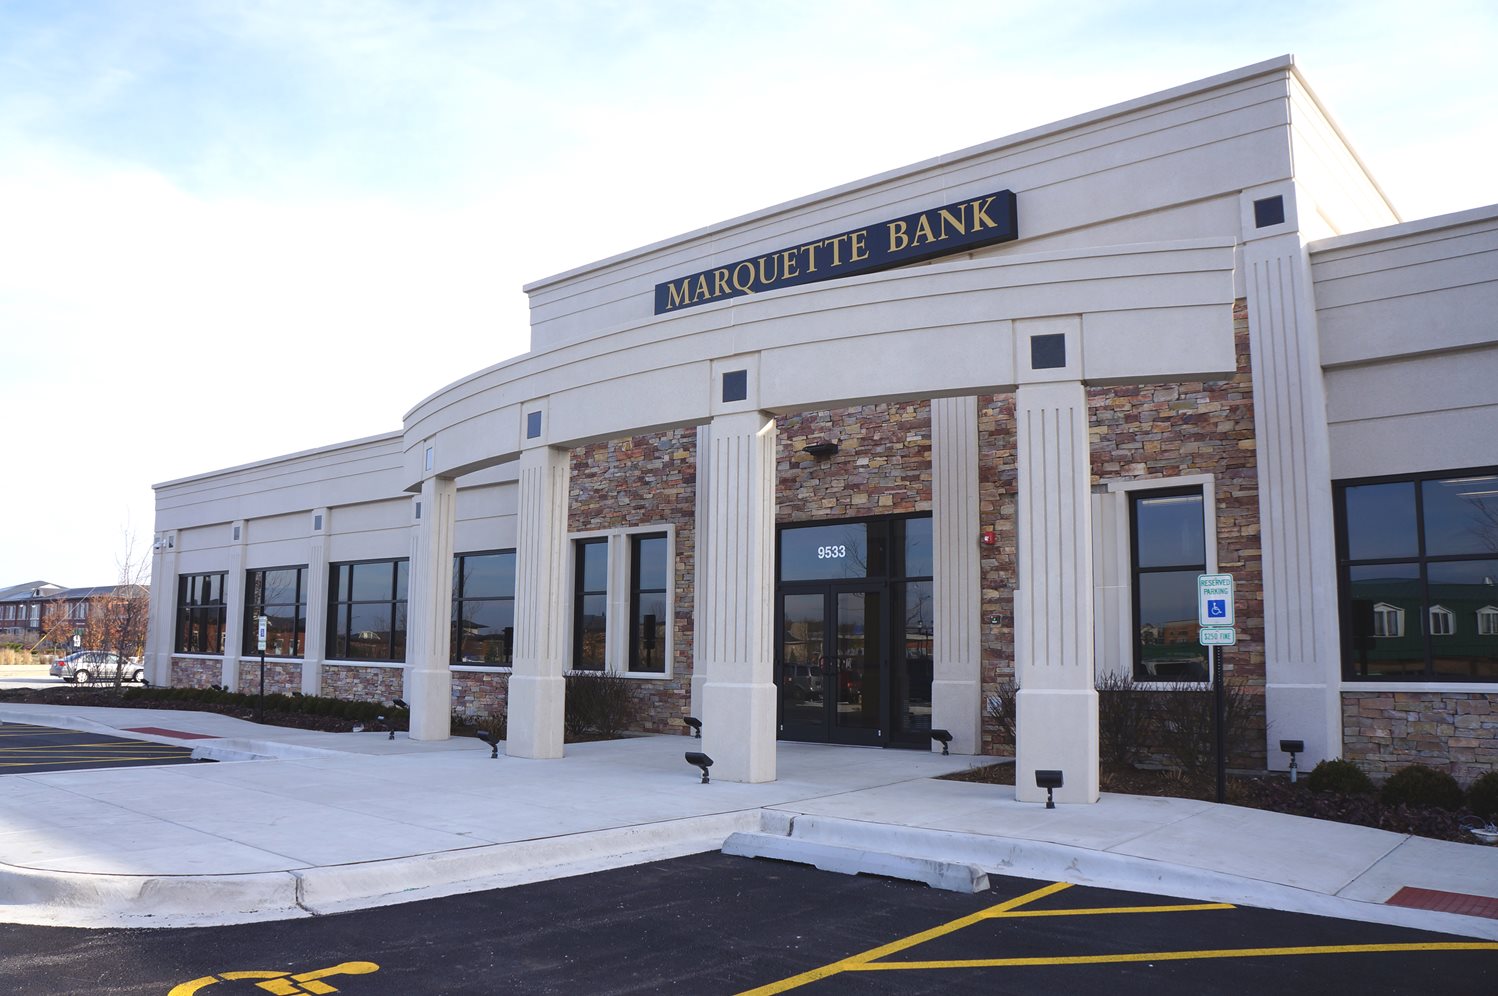 Marquette Bank - Orland Park 143rd Branch